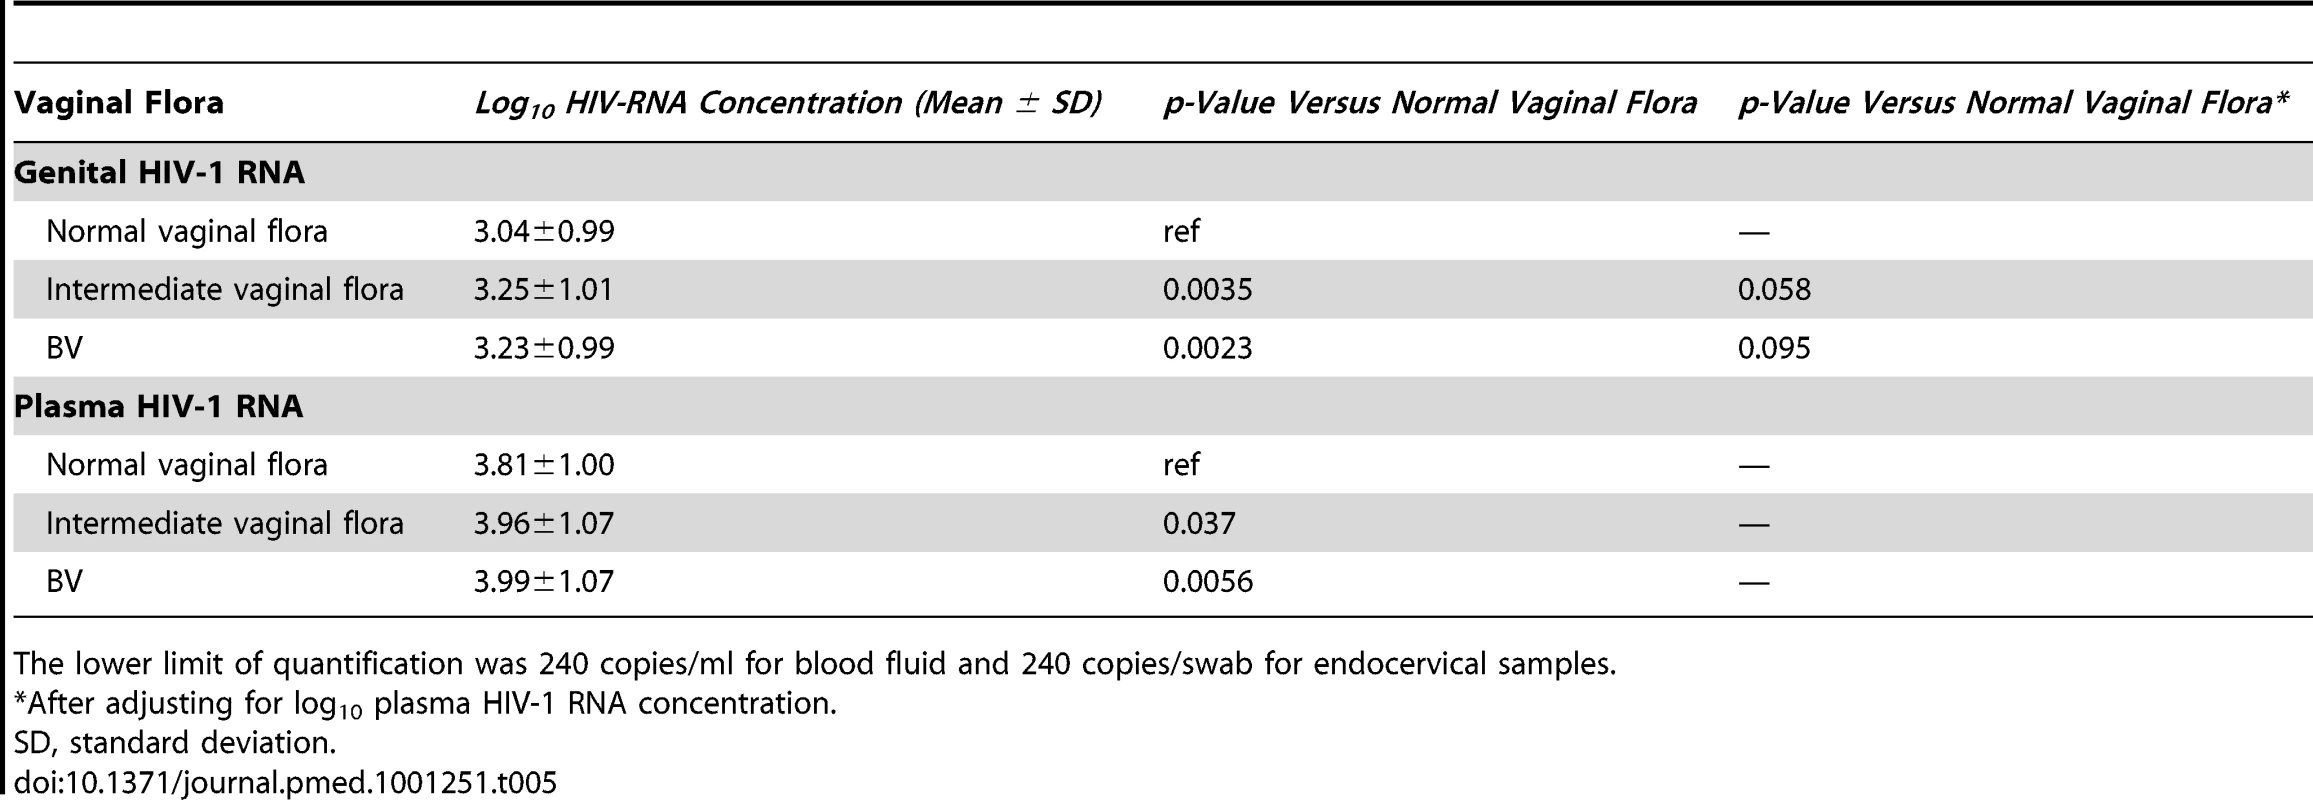 Log<sub>10</sub> HIV-RNA concentration in plasma (baseline and follow-up) and female genital secretions (6-mo follow-up visit) compared by vaginal flora category (normal vaginal flora, intermediate vaginal flora, and BV).